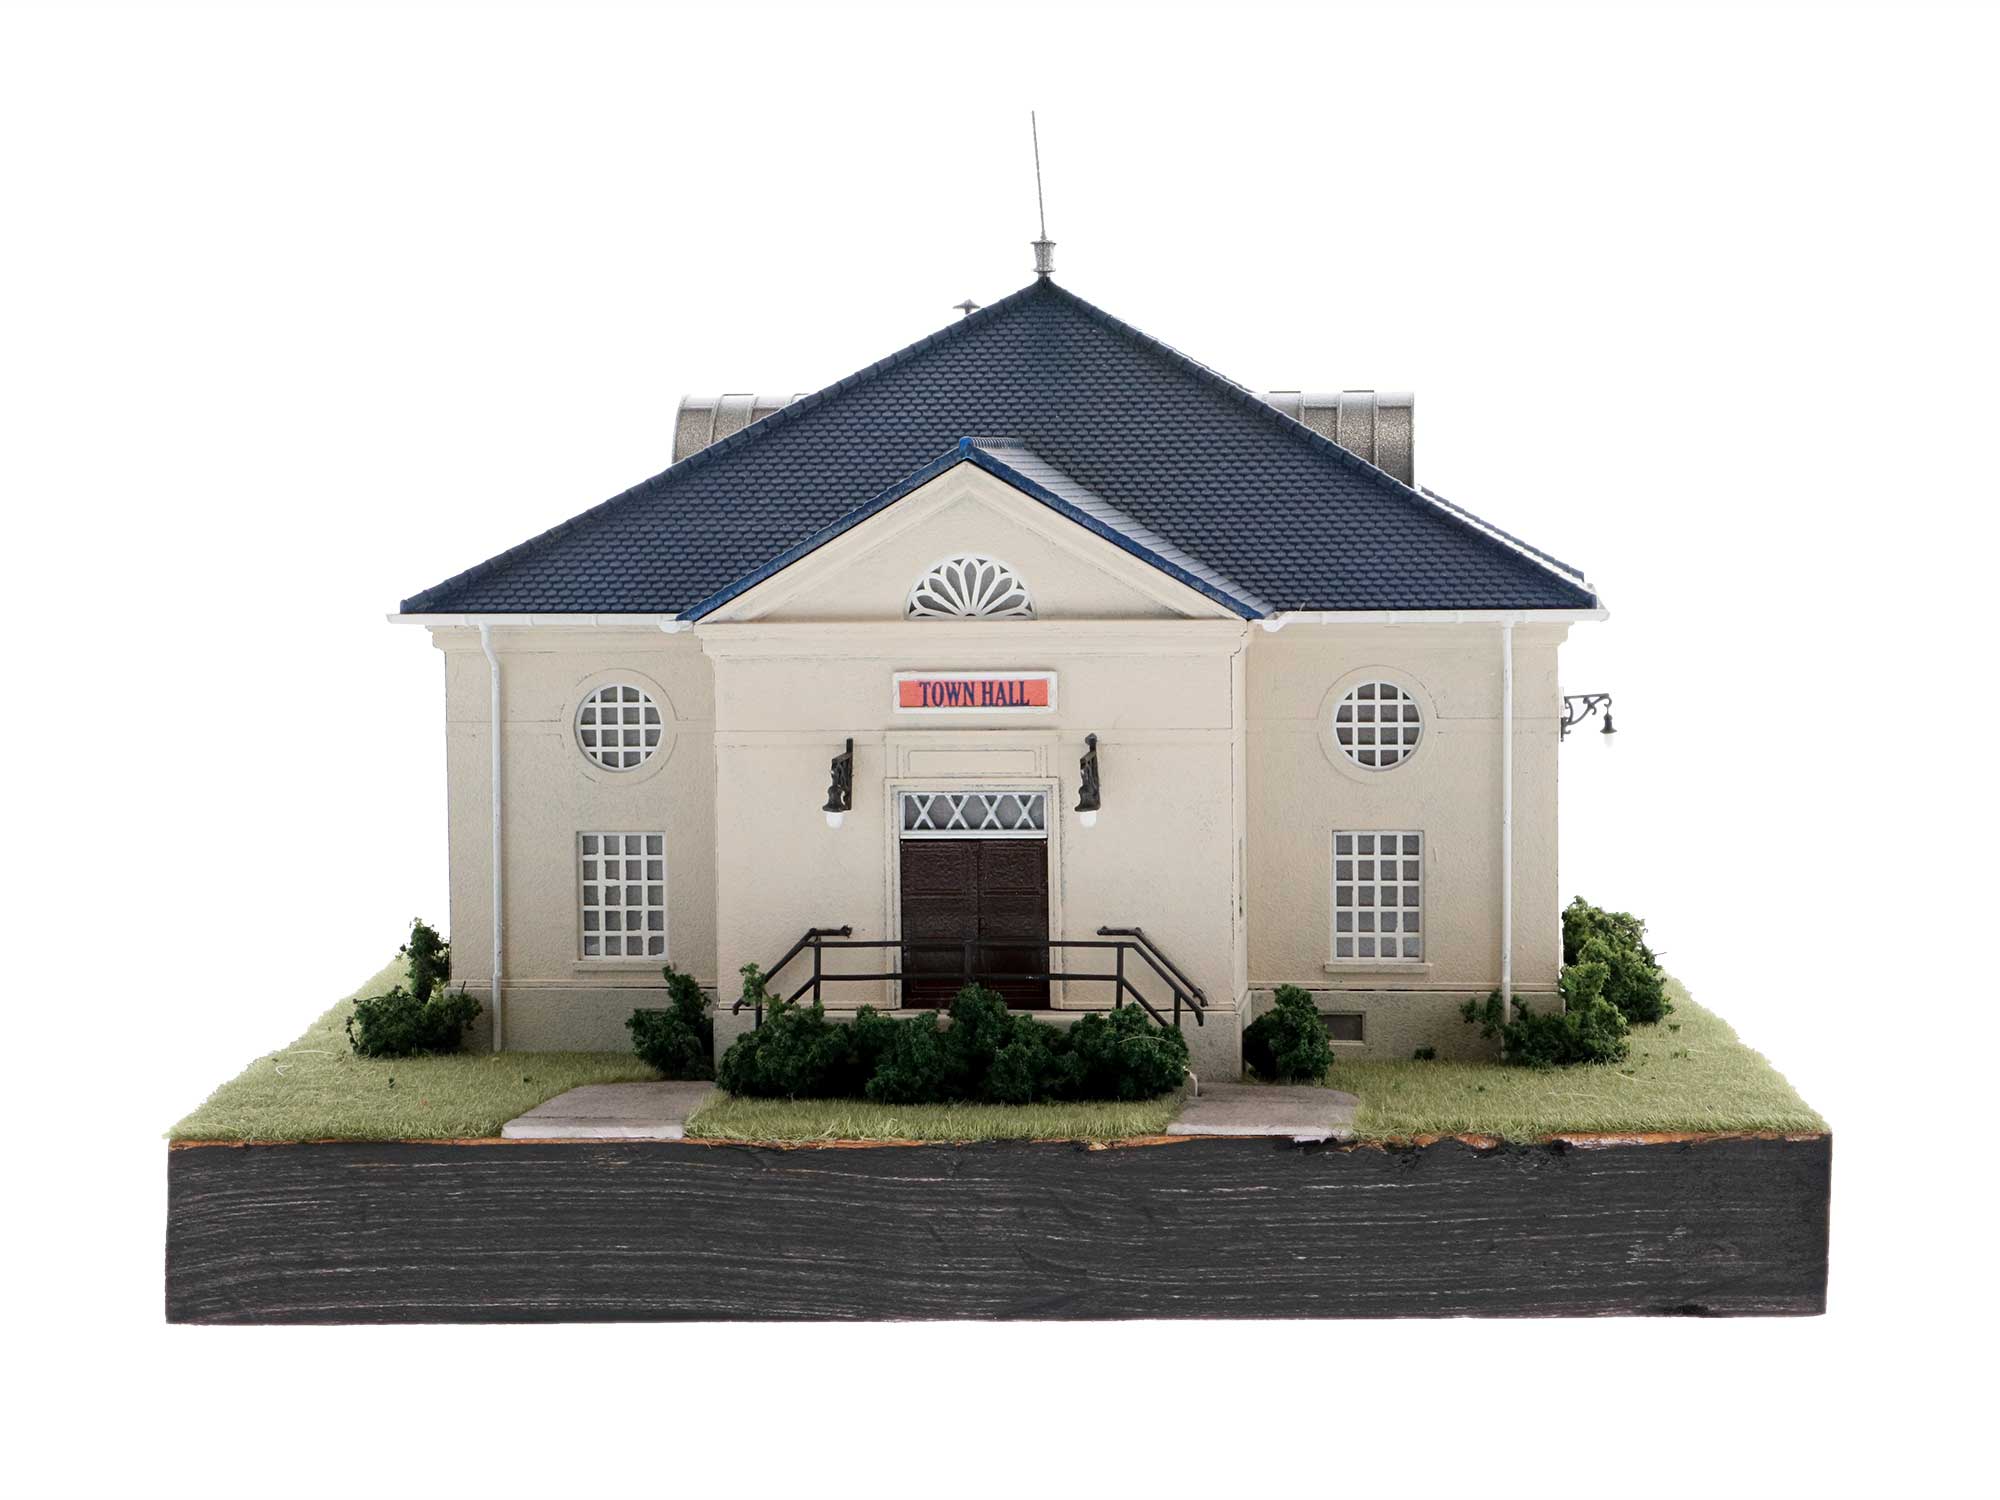 Lionel HO 2167040 - Town Hall Building Kit